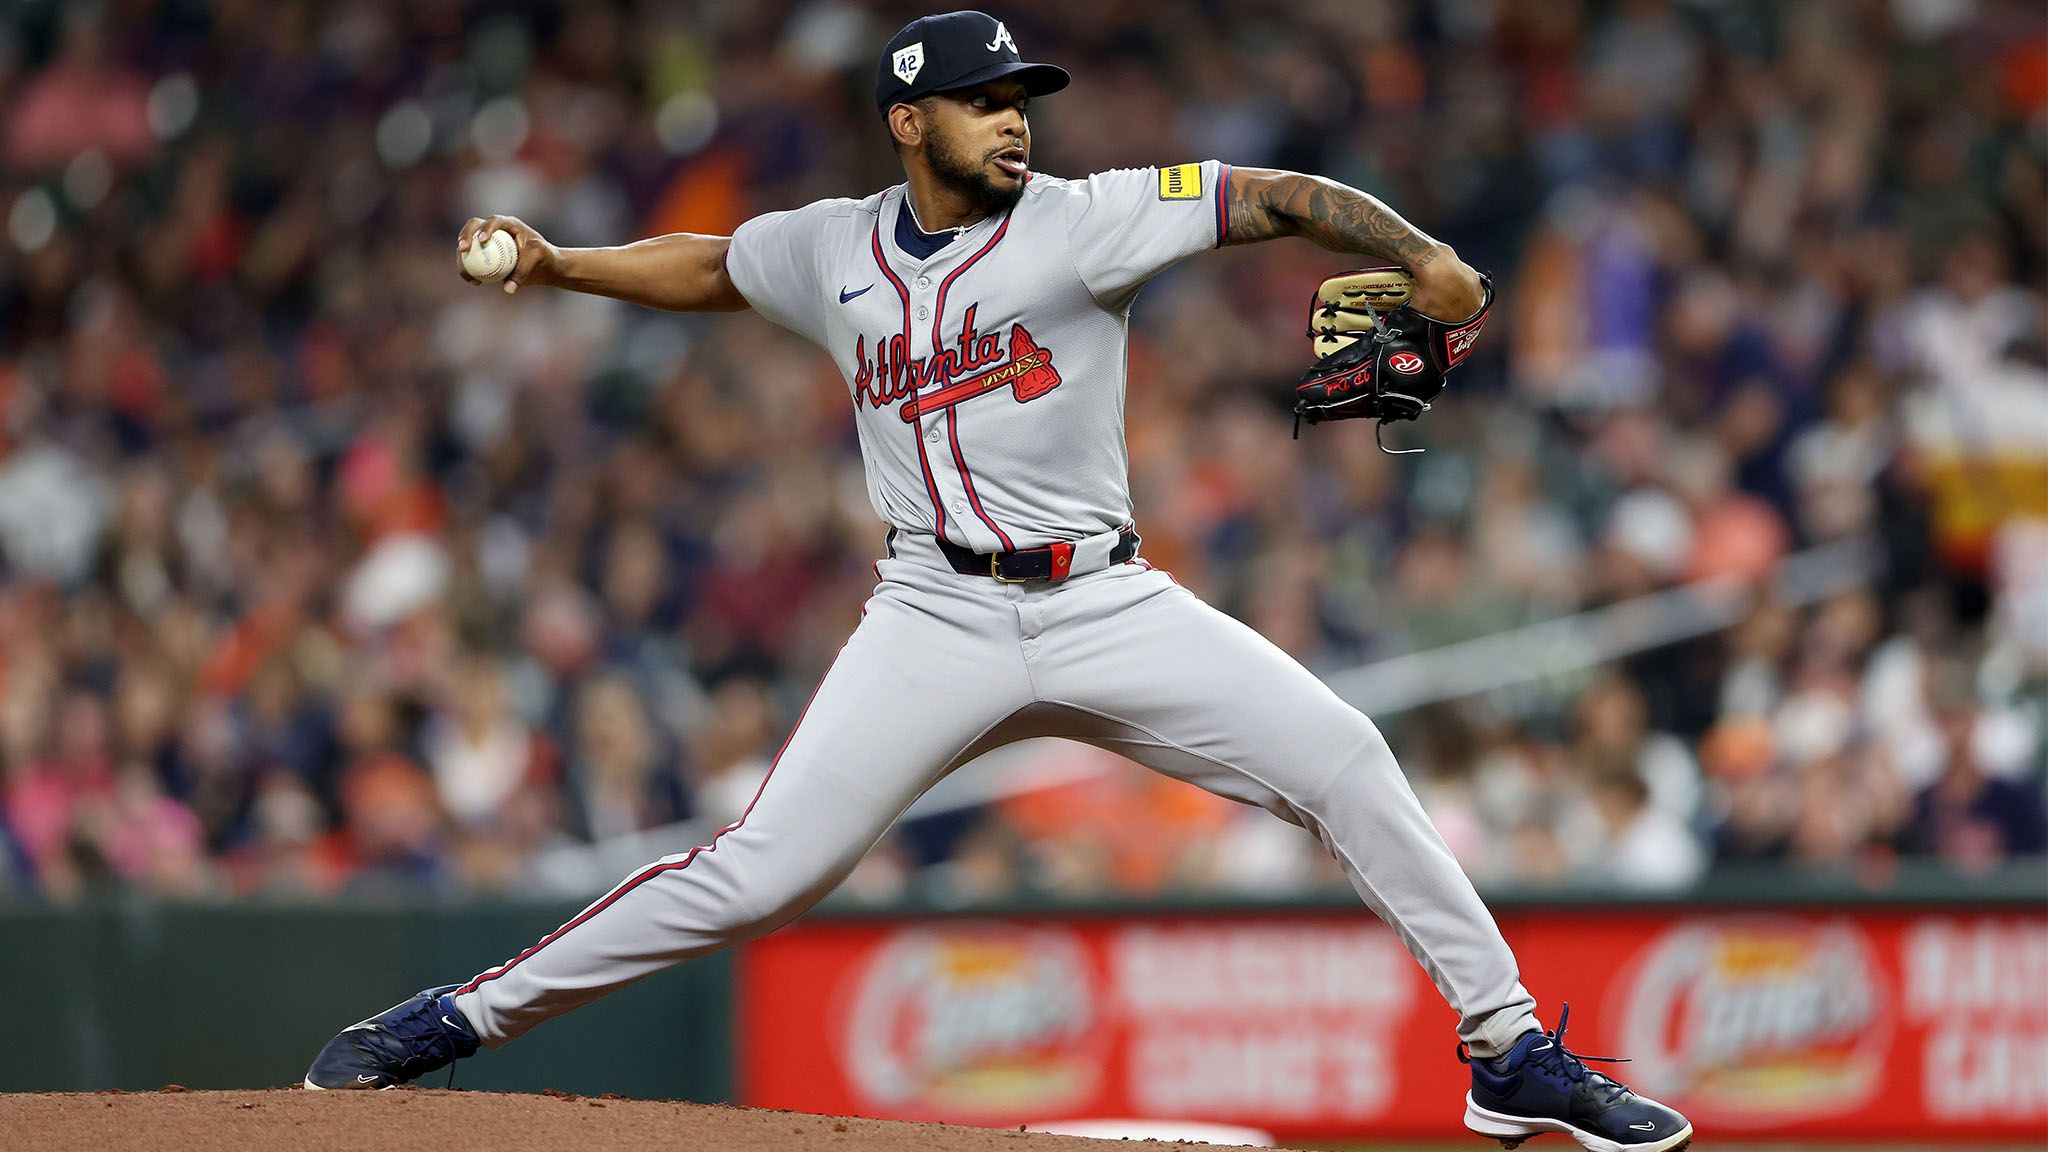 How to watch today's Atlanta Braves vs Miami Marlins MLB game: Live stream, TV channel, and start time | Goal.com US